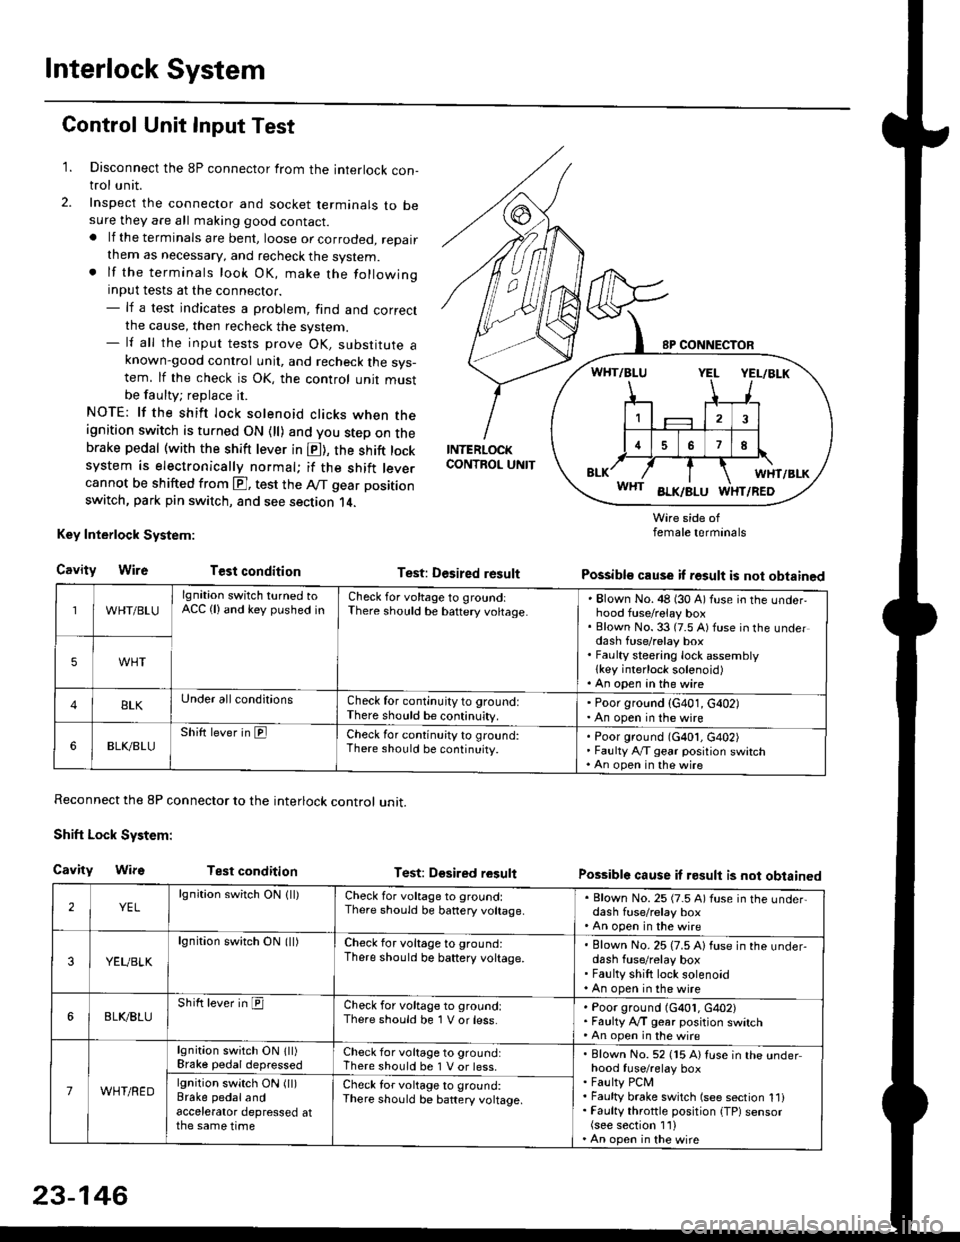 HONDA CIVIC 1998 6.G Service Manual Interlock System
Control Unit Input Test
1. Disconnect the 8P connector from the interlock con-trol unit.
2. Inspect the connector and socket terminals to besure they are all making good contact.. lf 